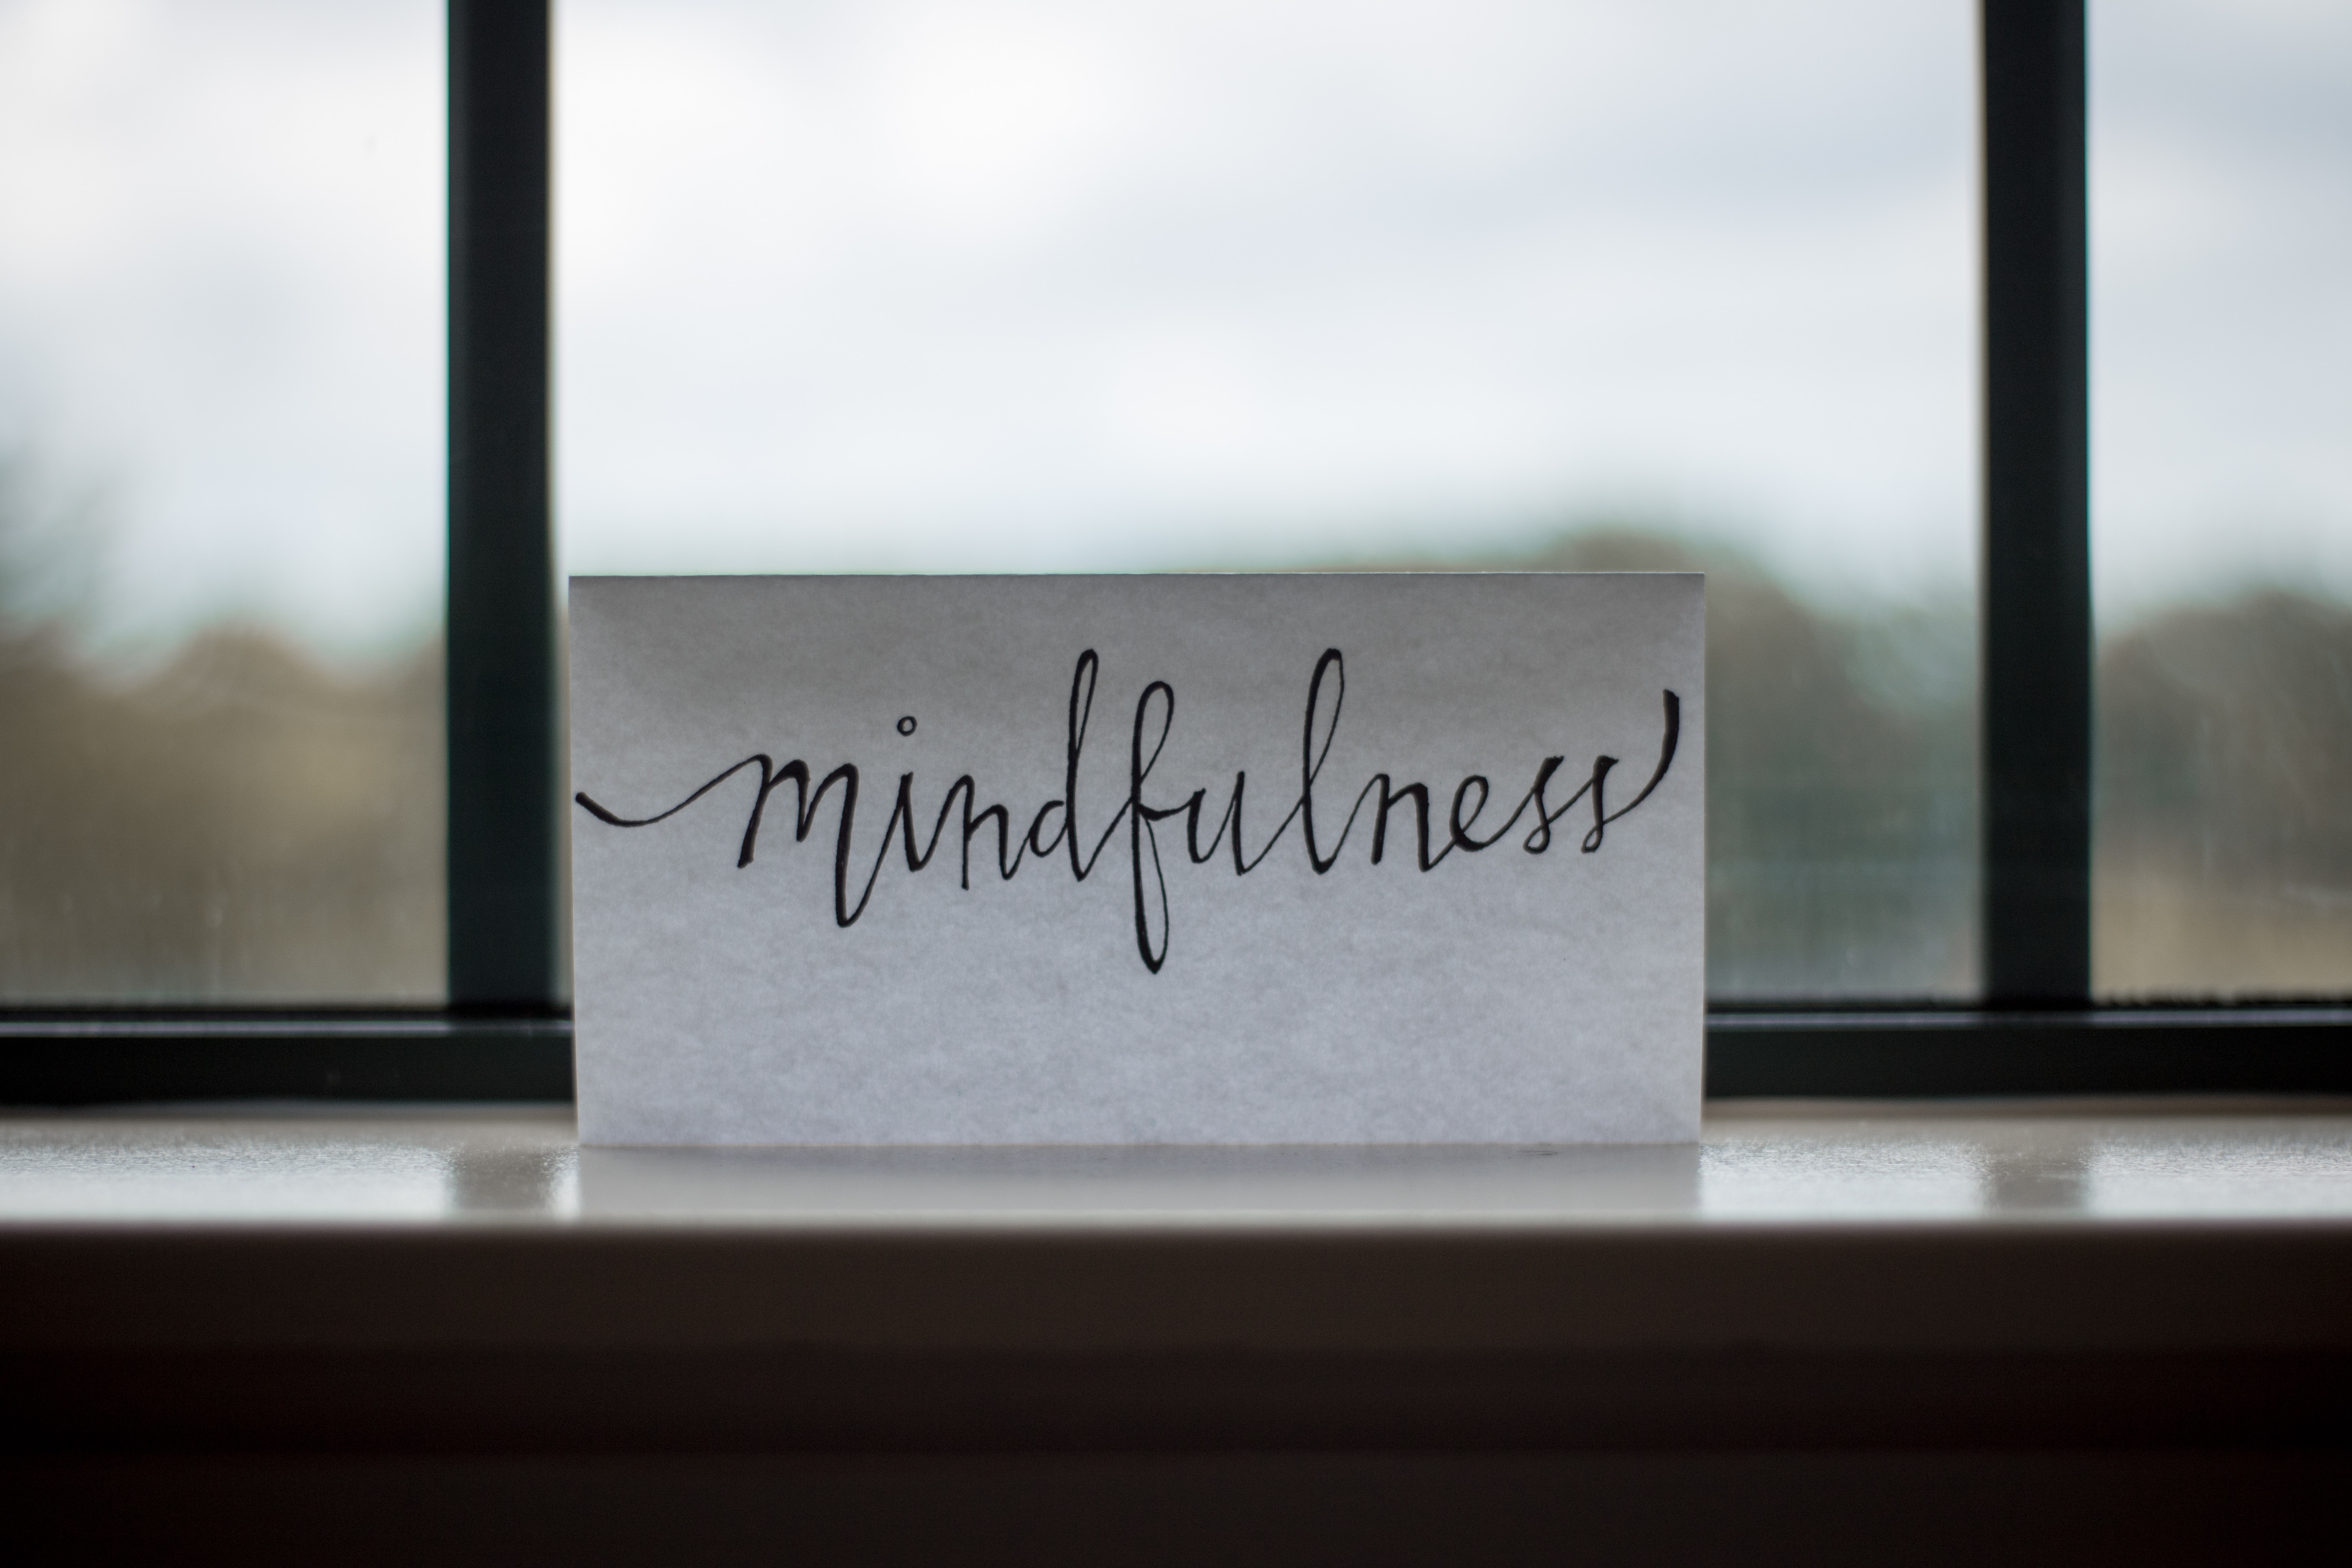 What Does it Mean to Be More Mindful?